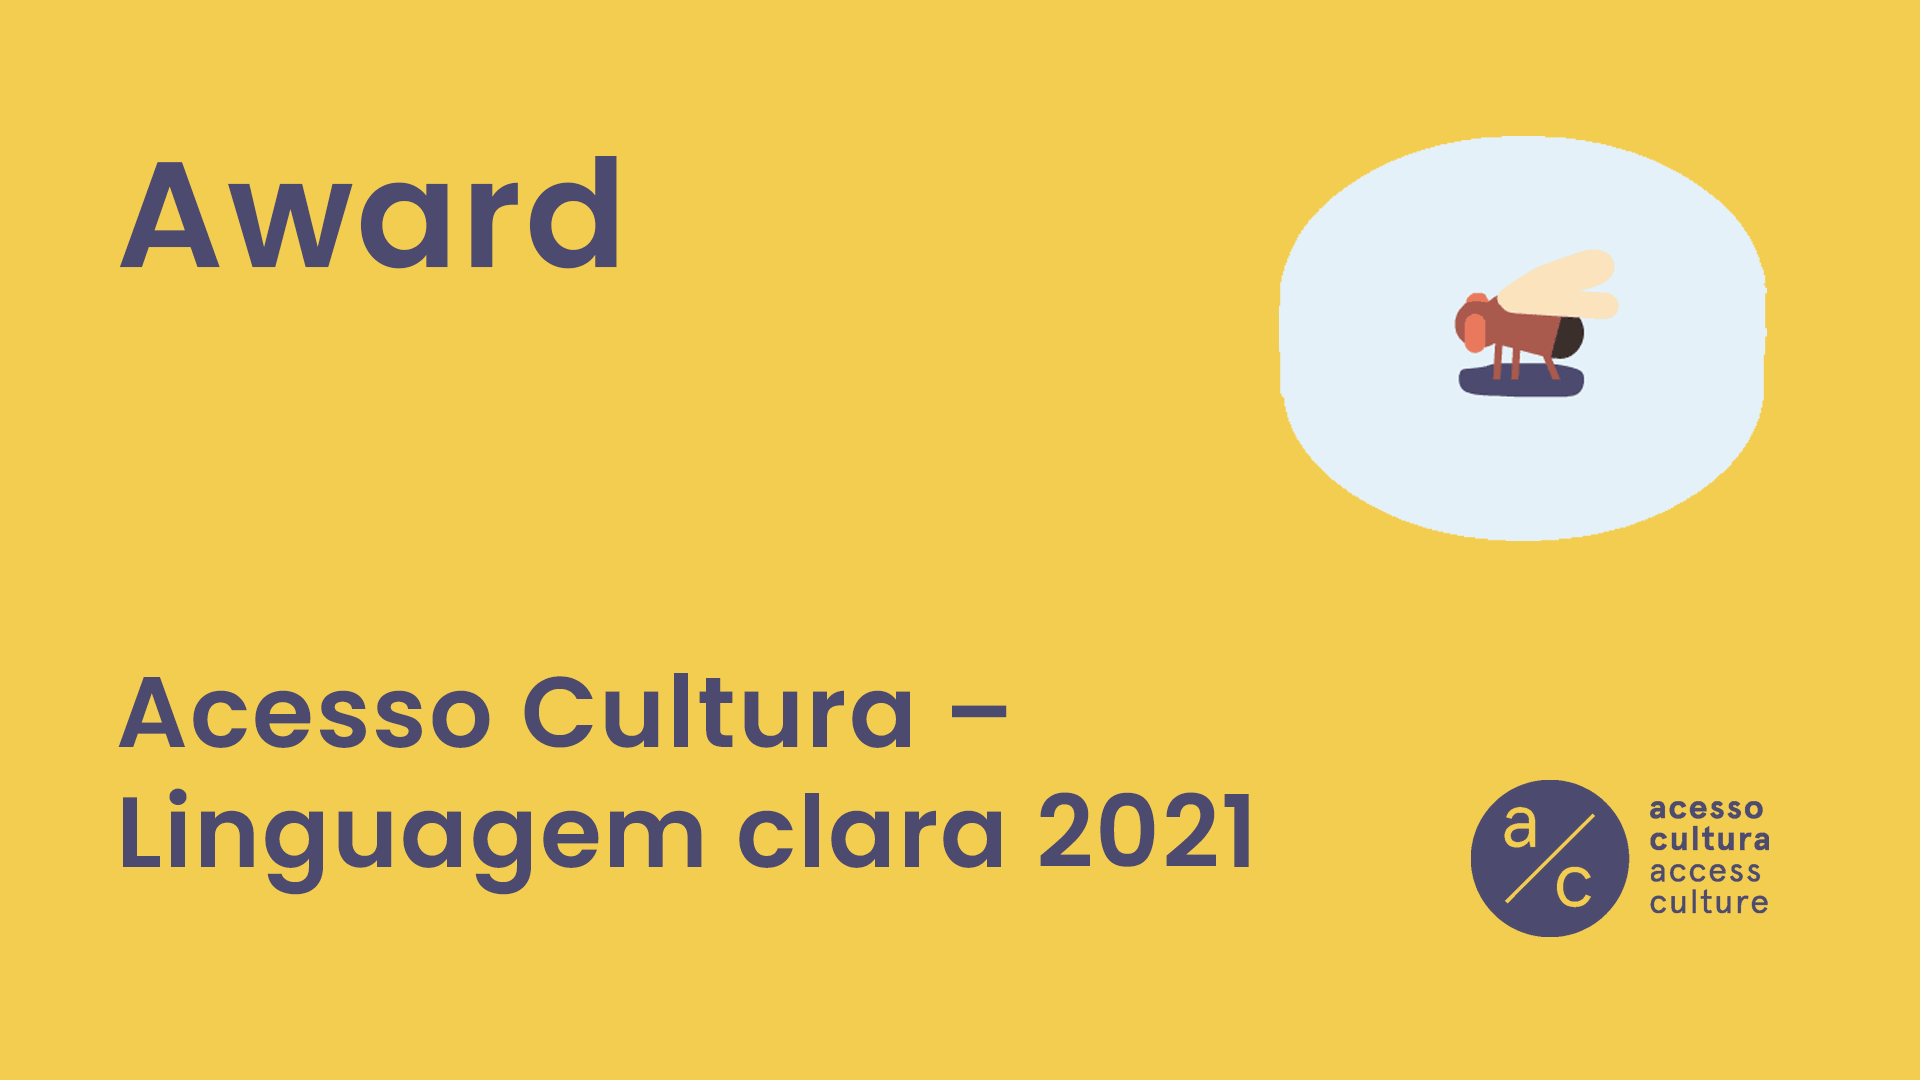 Champalimaud Foundation's text won the 2021 "Acesso Cultura" Award